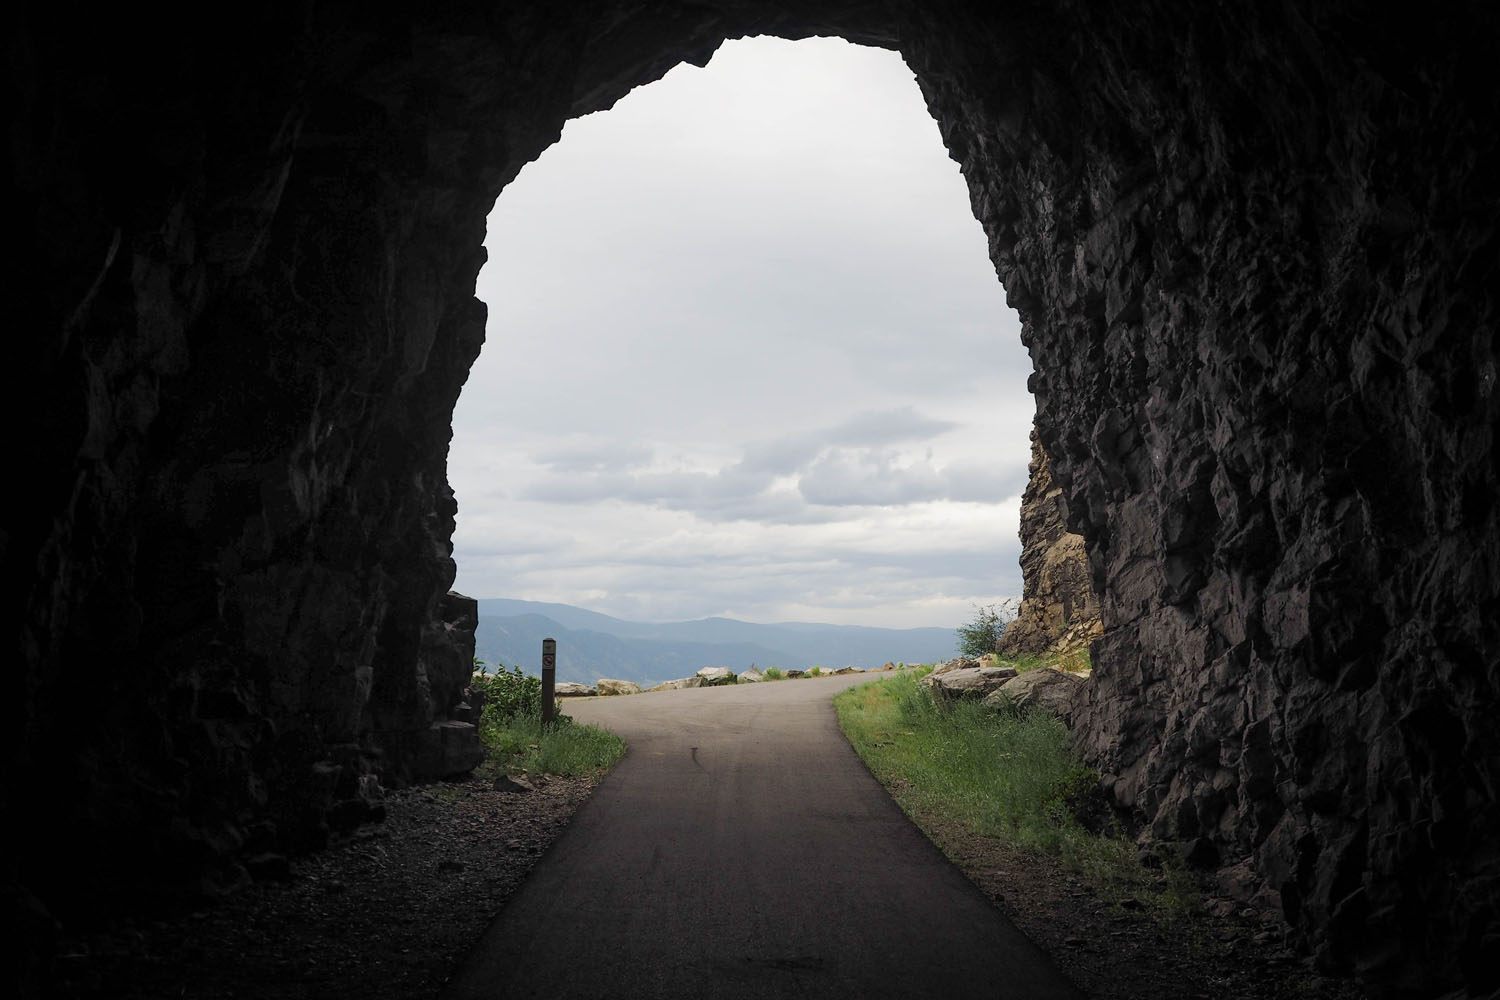 Looking through tunnel on bike trail. Looking out to hills and horizon in BC